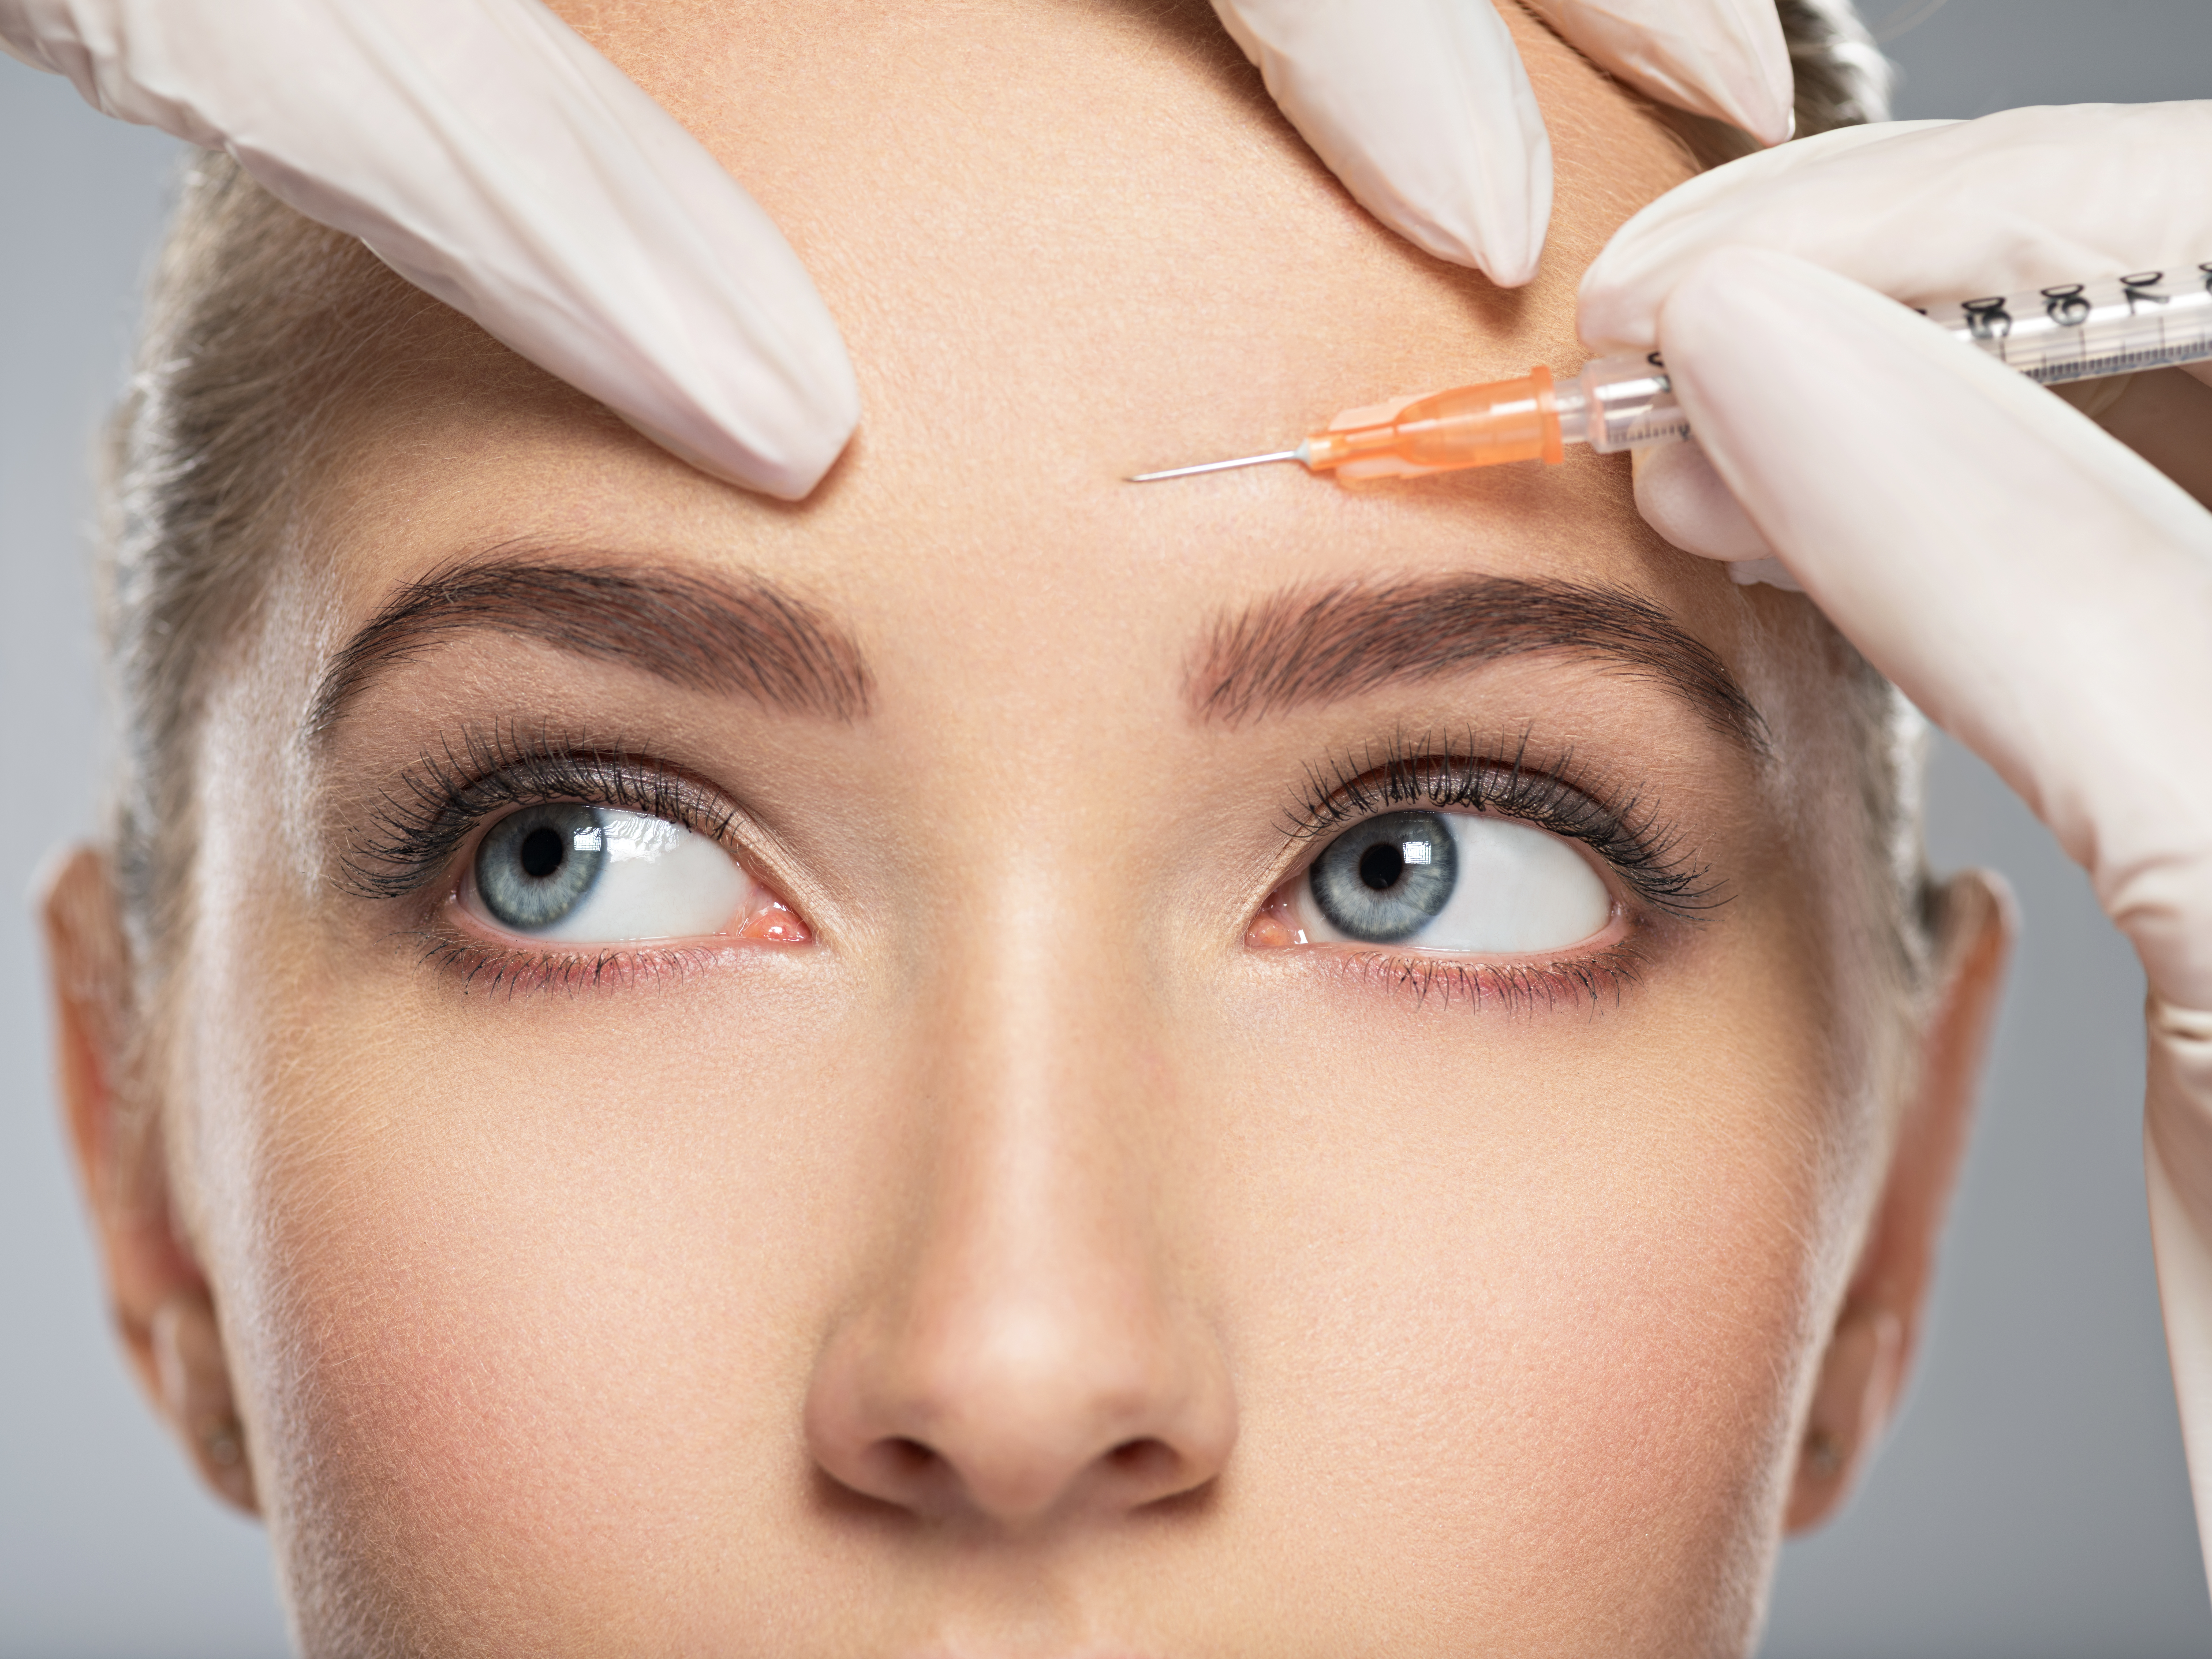 inquisitive woman receiving botox injections